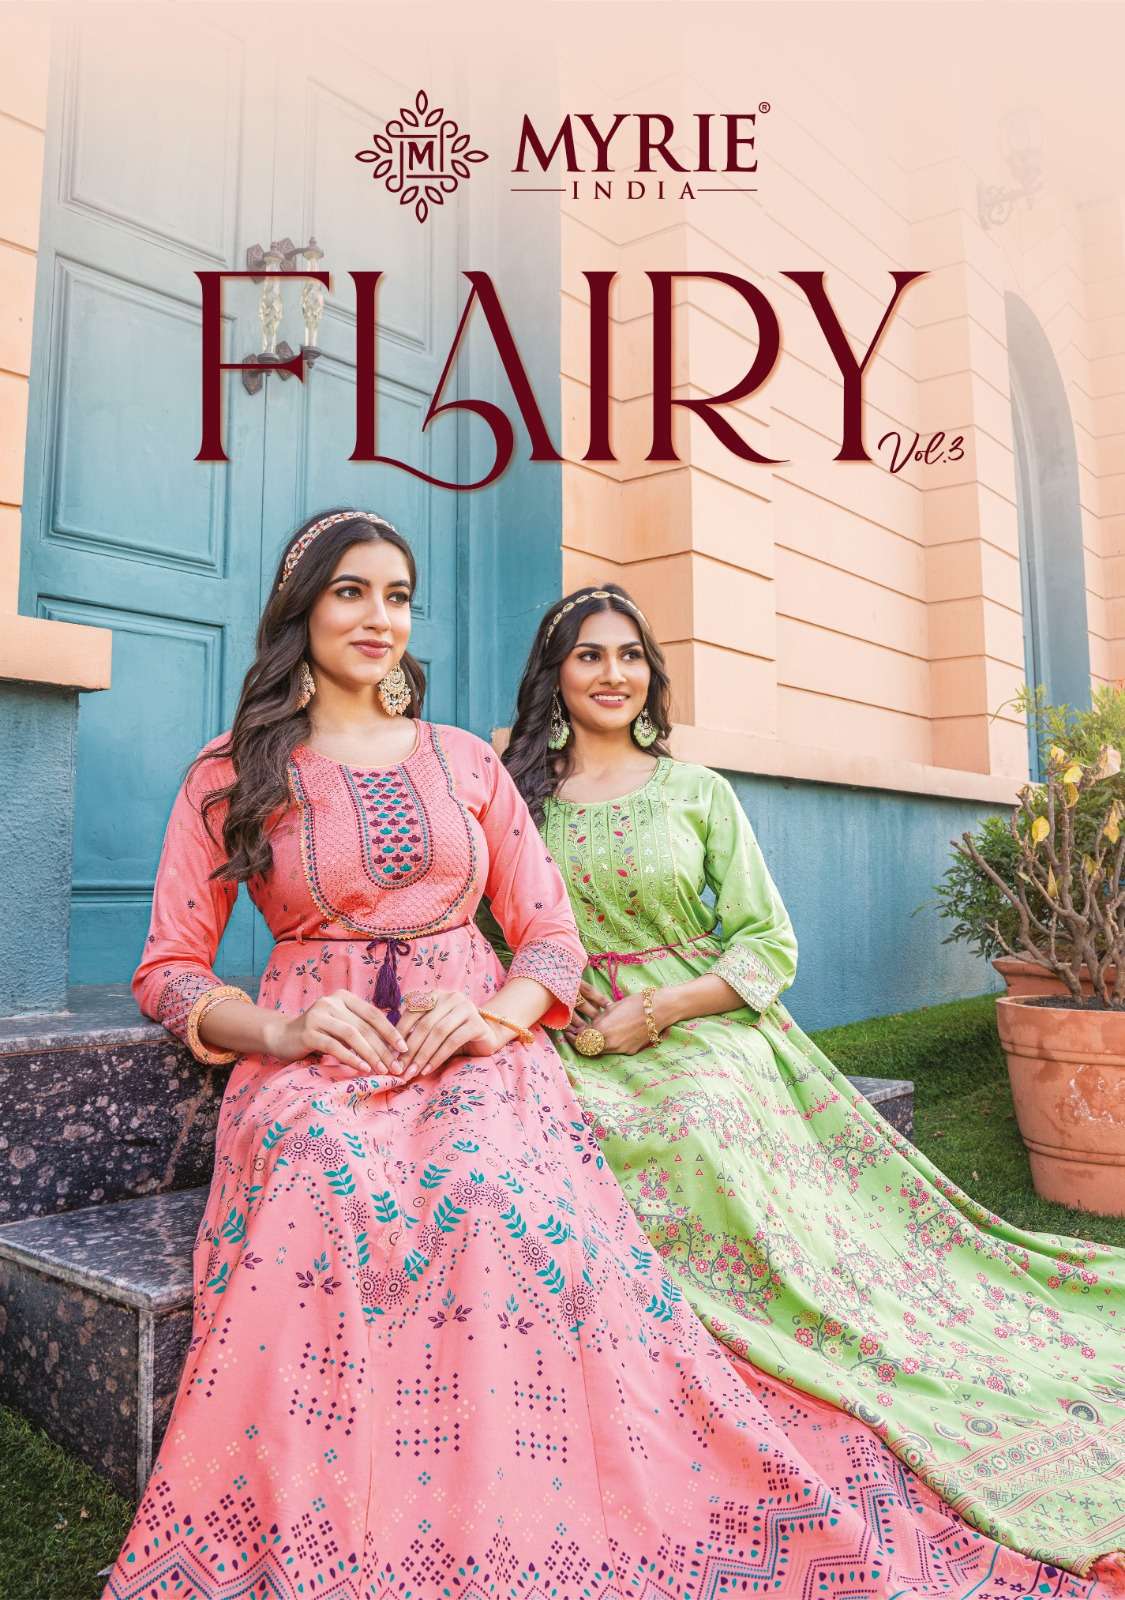 mayree india present flairy vol 3 designer rayon printed fancy long gowns collection